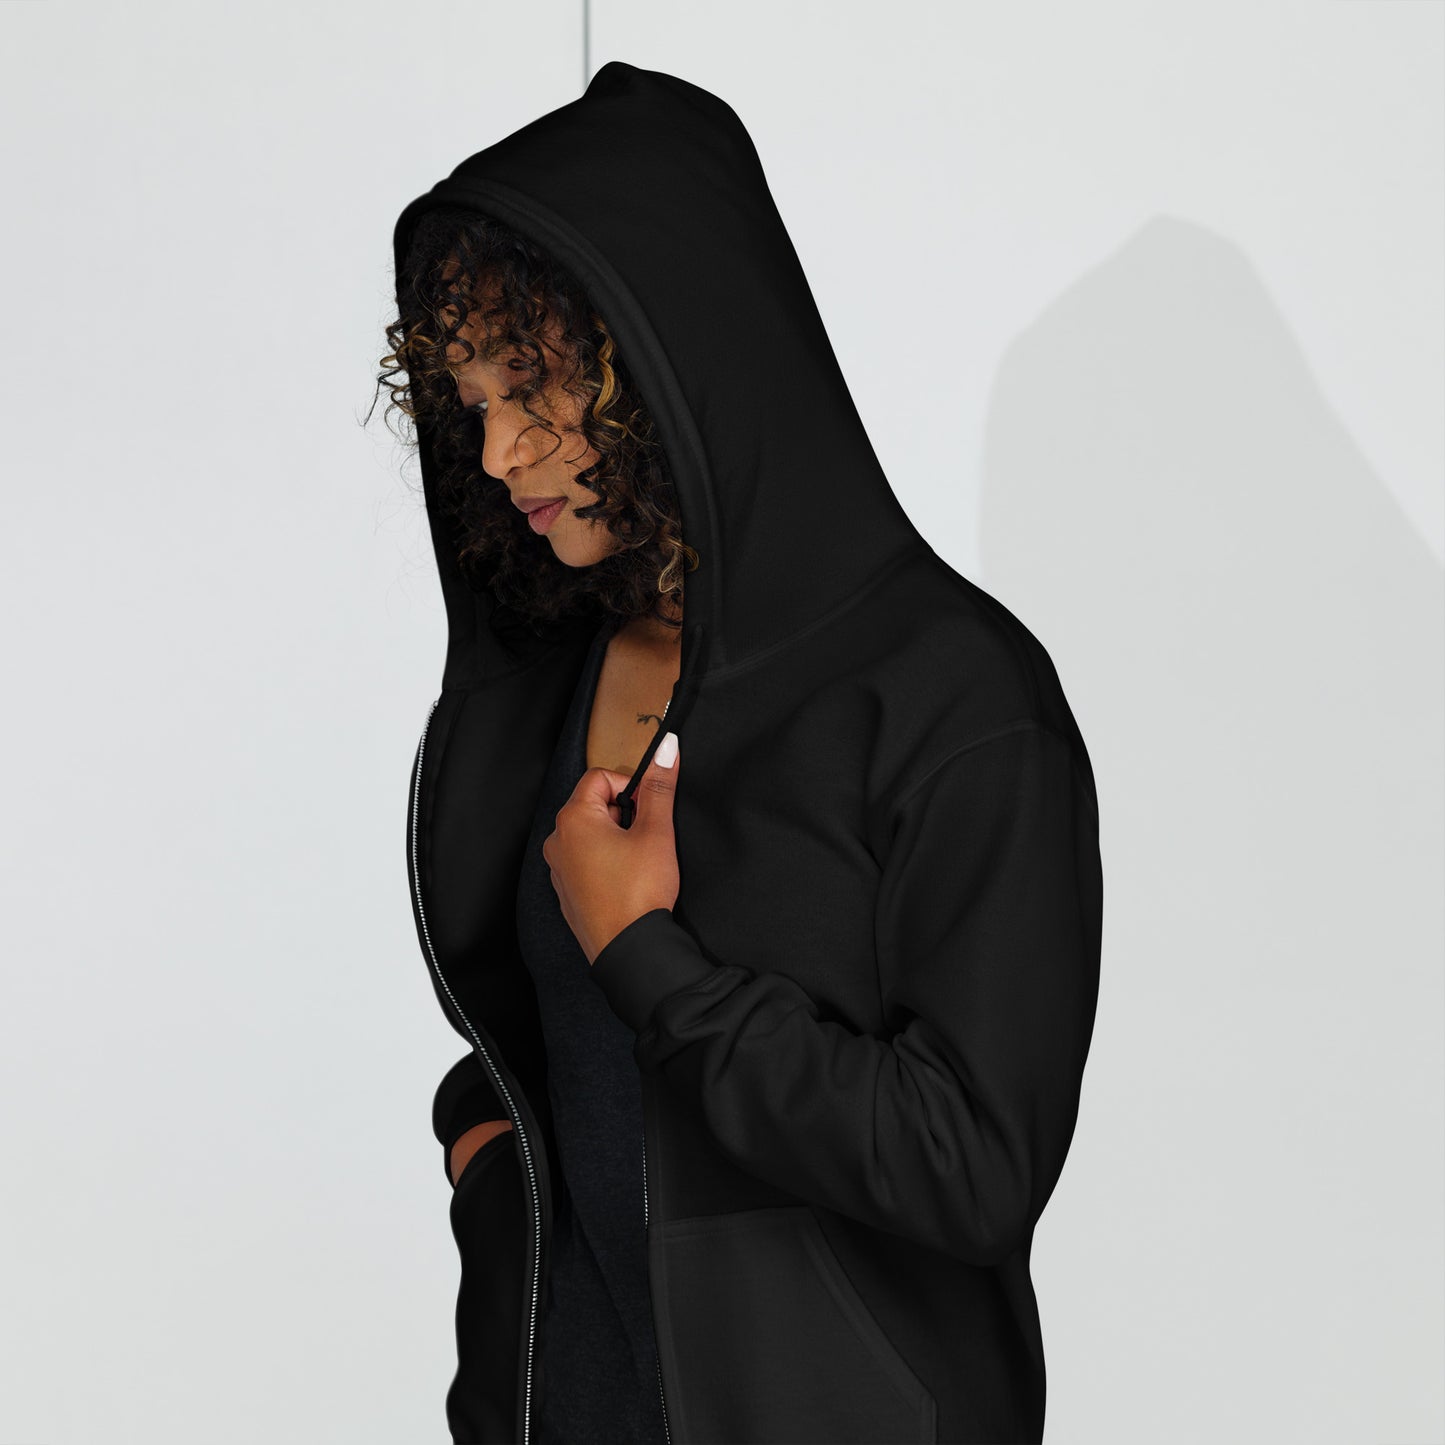 Limerence Heavy Harmony Fusion Zip Hoodie - Black